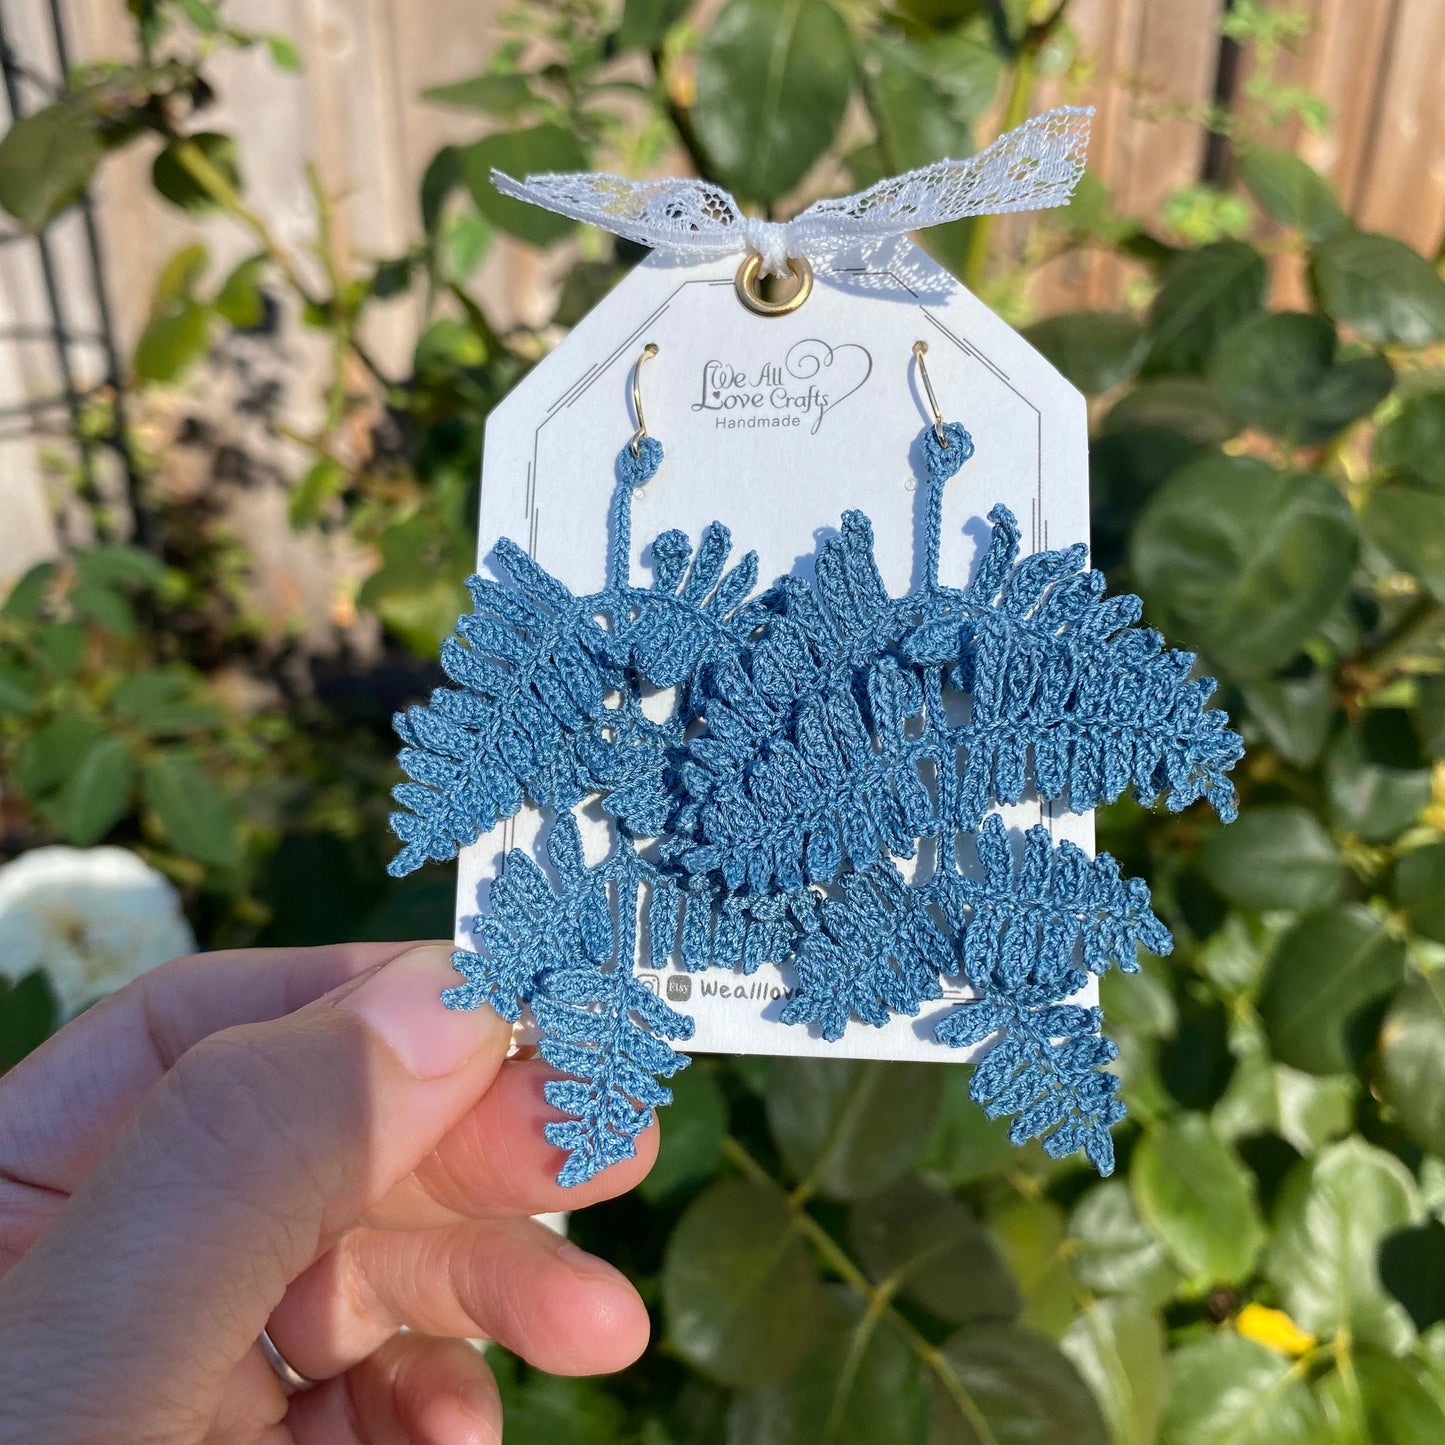 Load image into Gallery viewer, Grayish Blue ombre fern leaf crochet handmade dangle earrings/microcrochet/Knitted jewelry/Forest style/Indoor plant/Instagram/Ship from US
